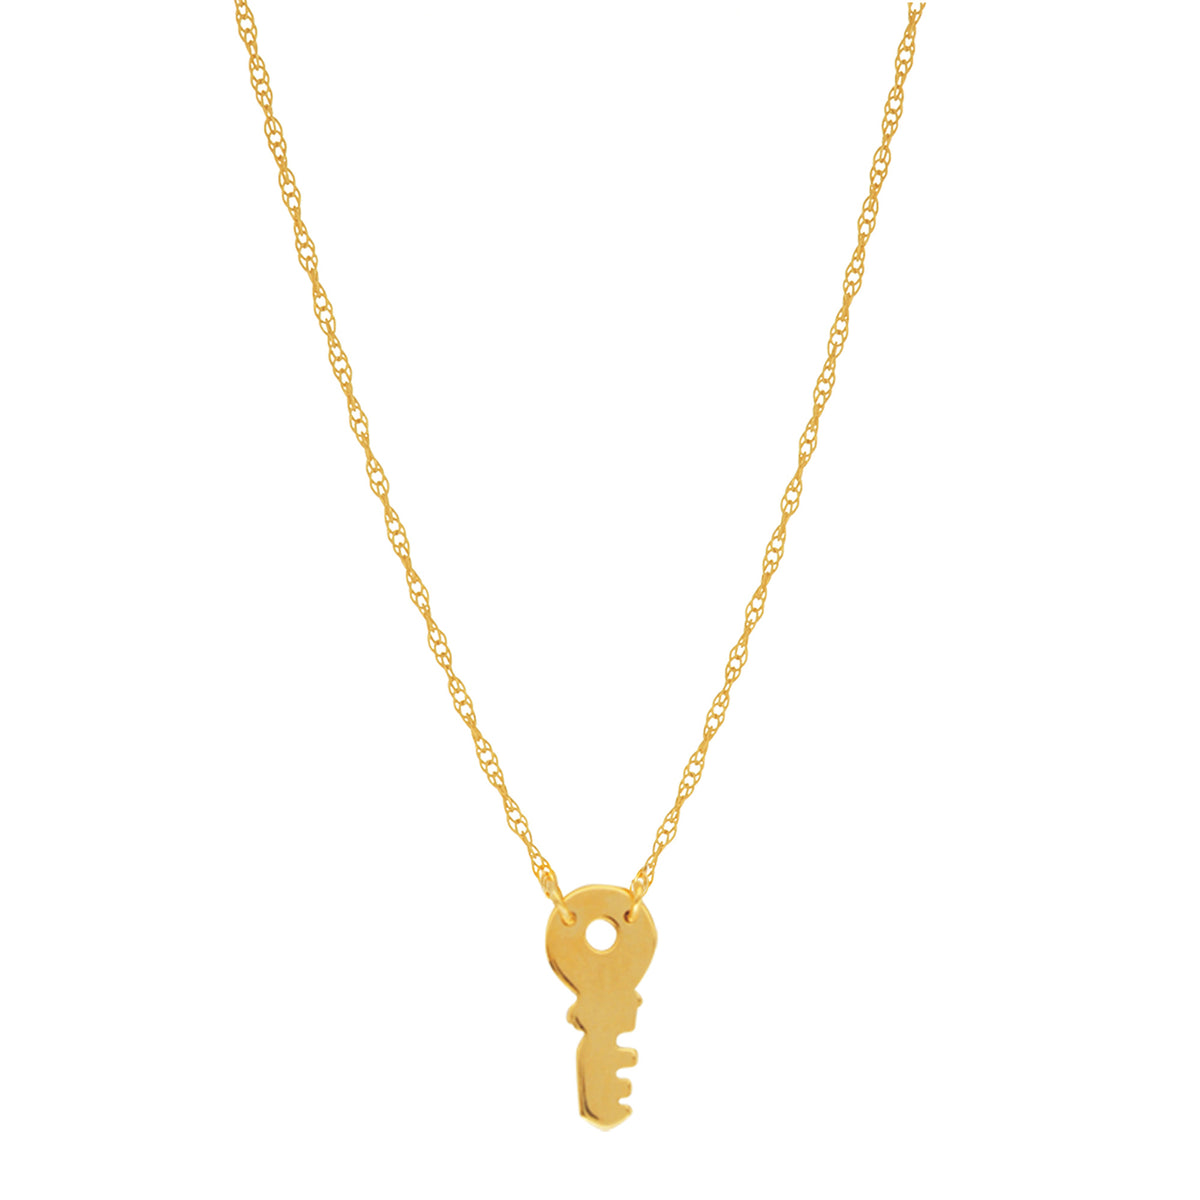 14K Yellow Gold Mini Key Pendant Necklace, 16" To 18" Adjustable fine designer jewelry for men and women